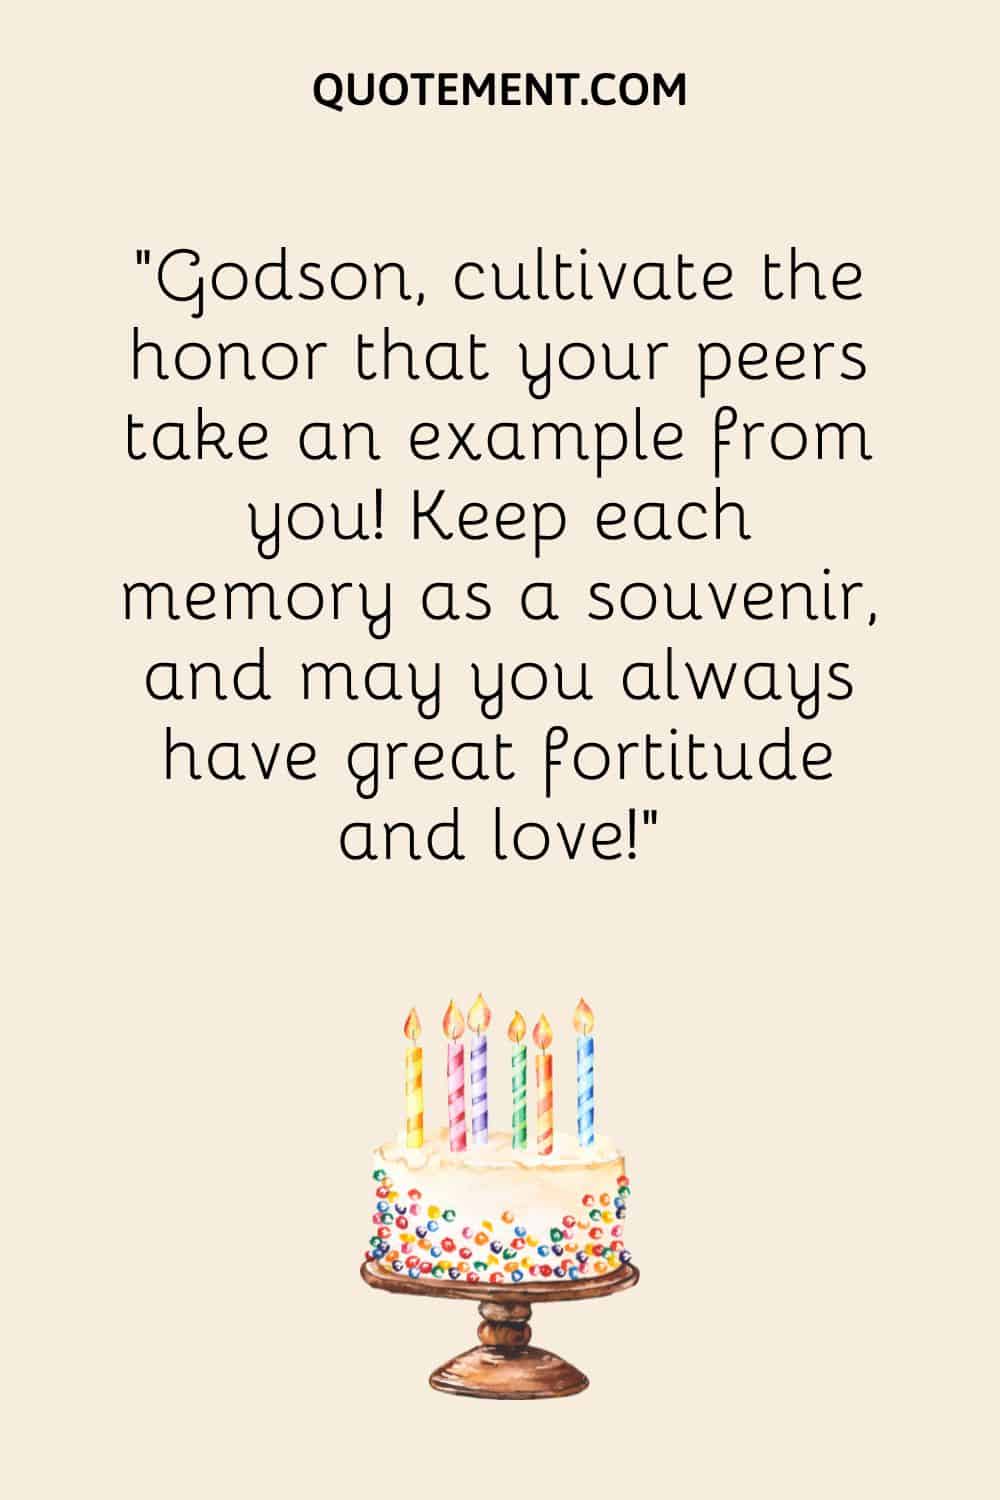 “Godson, cultivate the honor that your peers take an example from you! Keep each memory as a souvenir, and may you always have great fortitude and love!”.